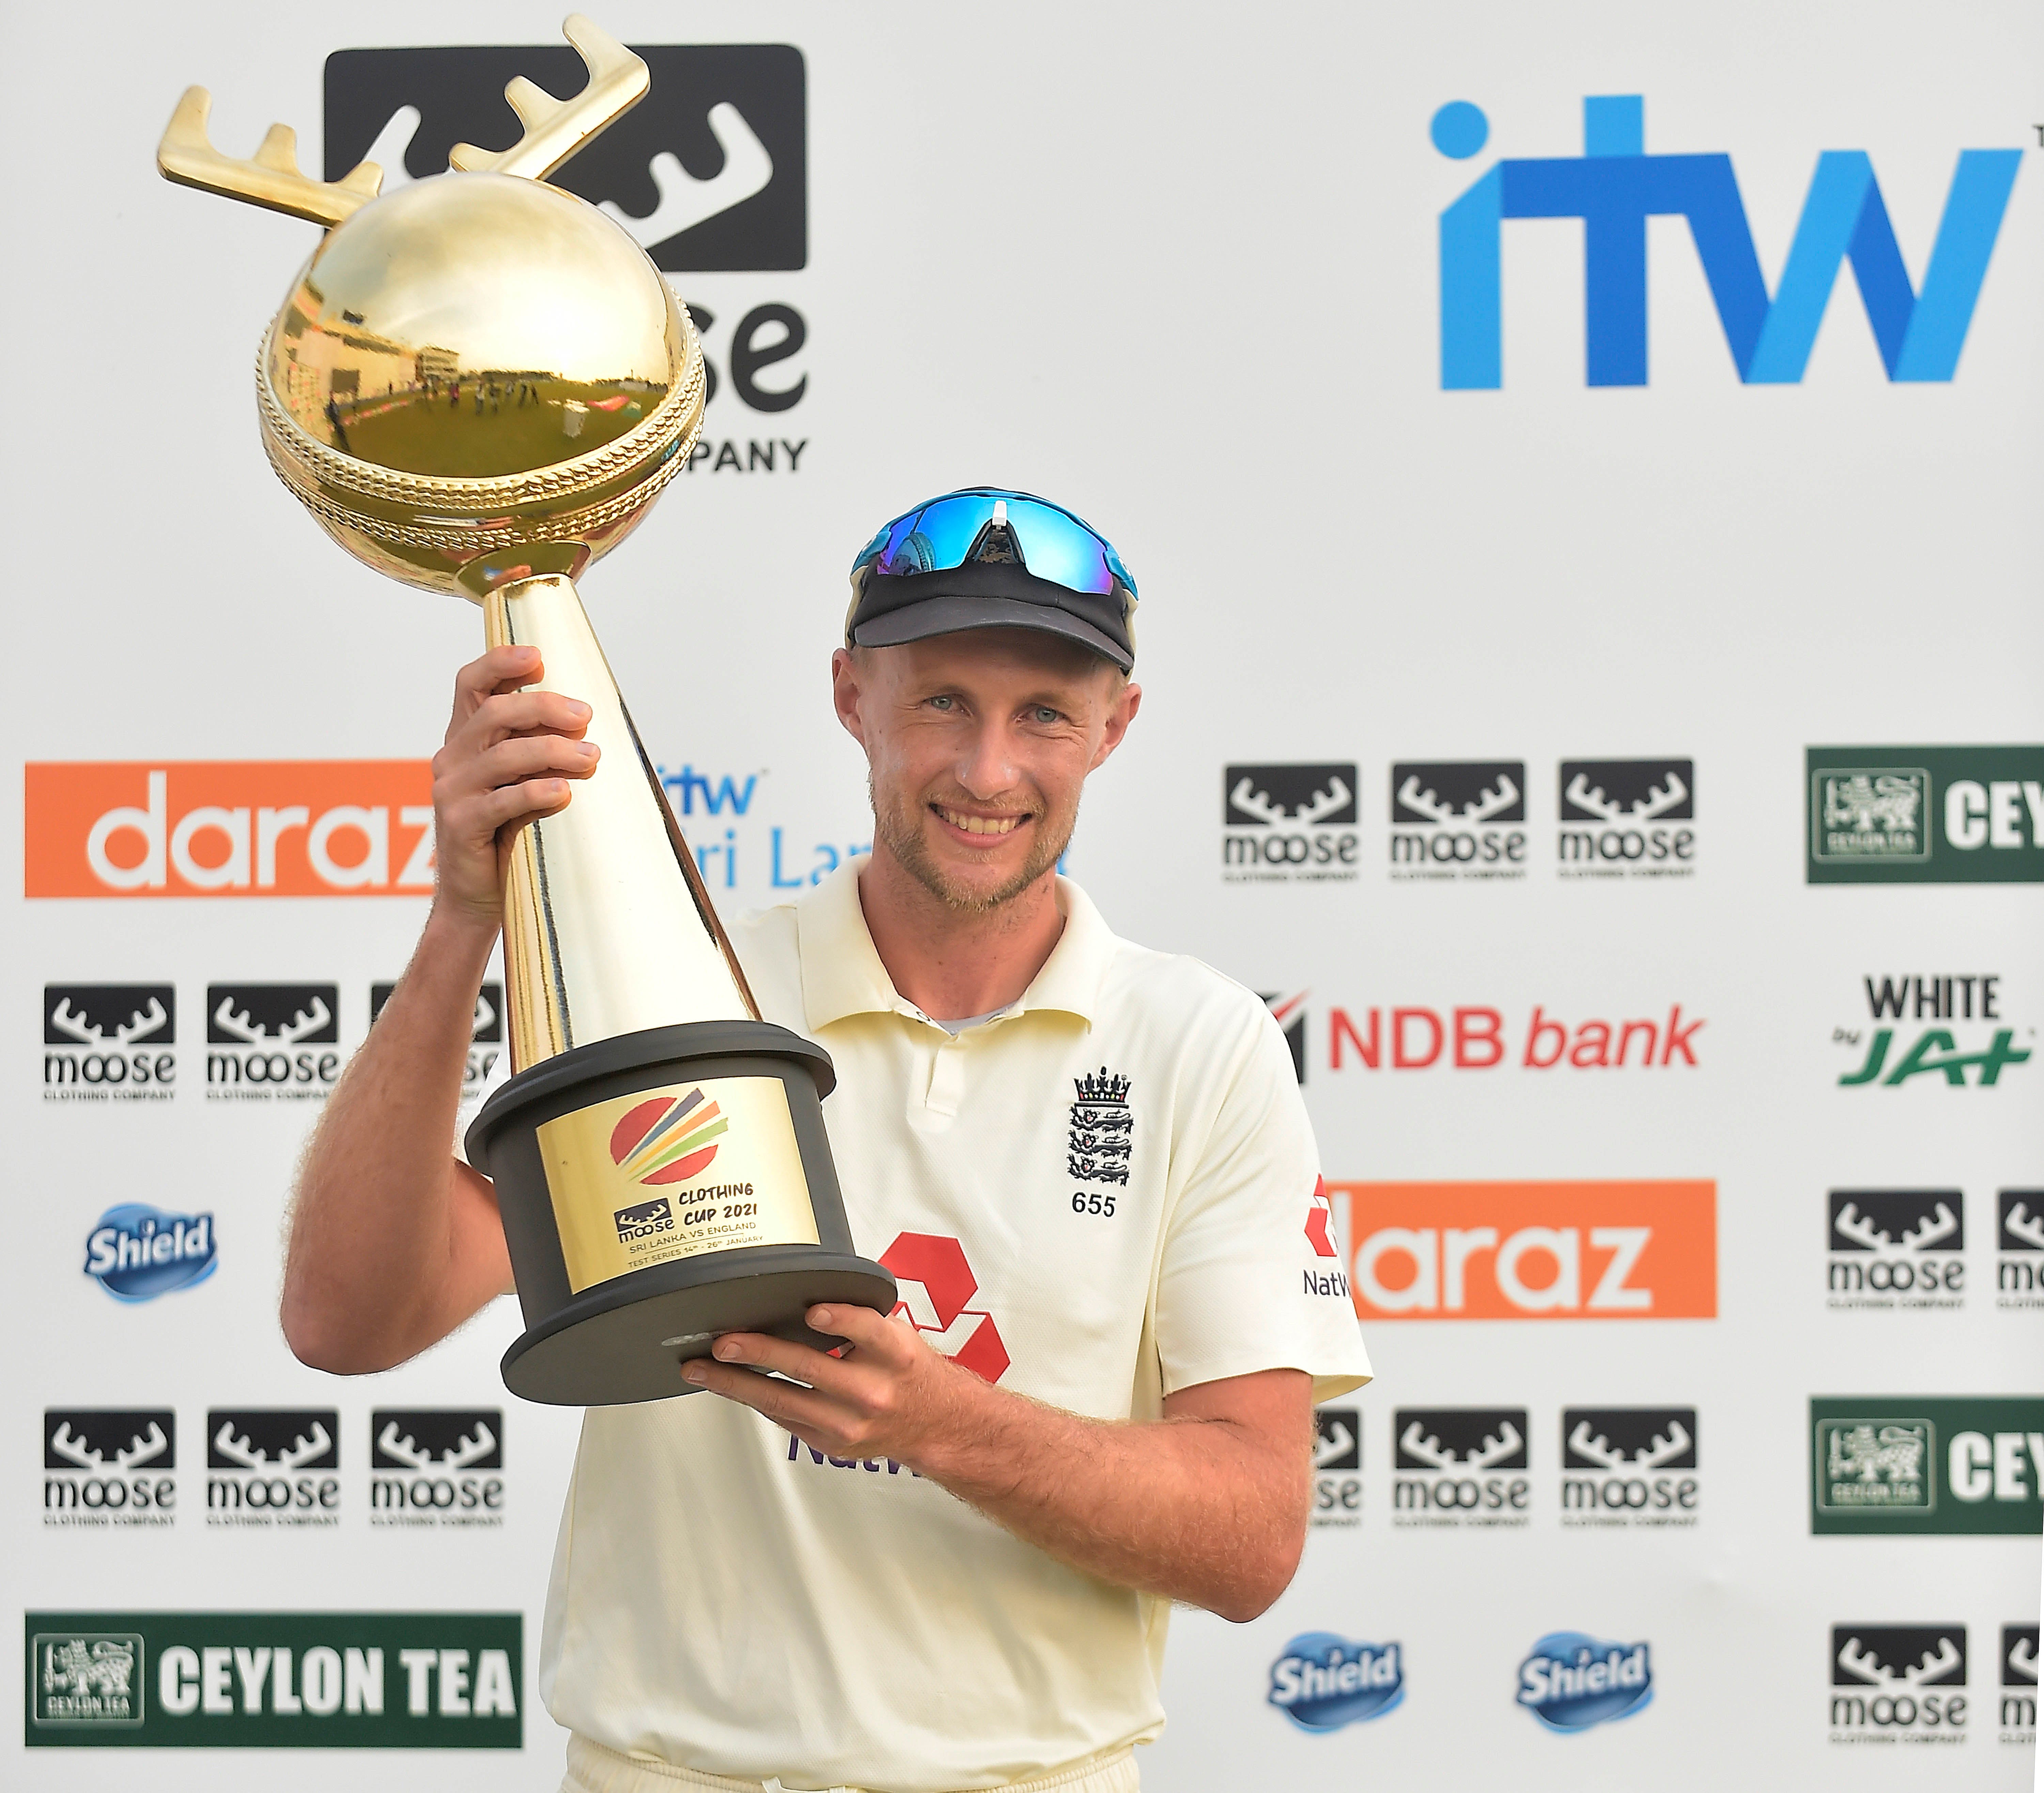 Joe Root, the England captain holds the ‘Moose Clothing Cup 2021’ trophy